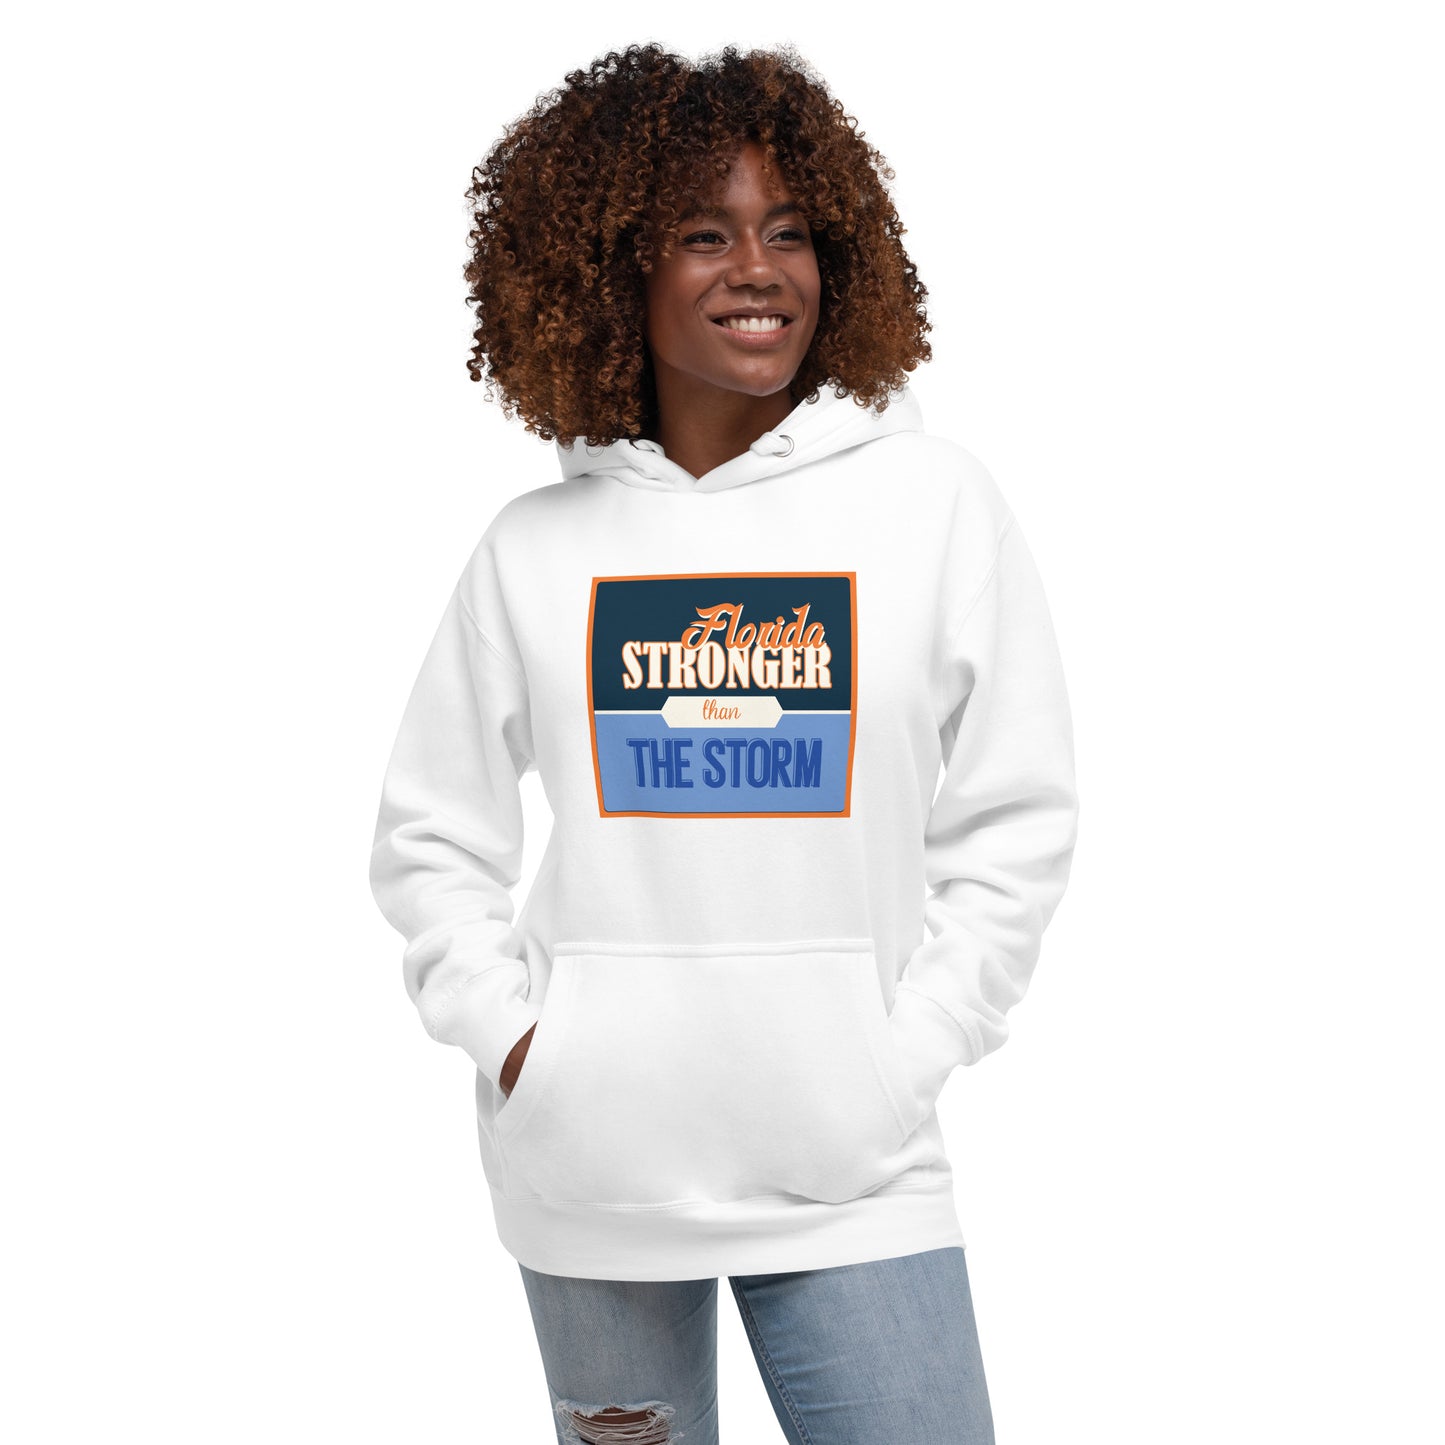 Florida Stronger Than The Storm Hoodie